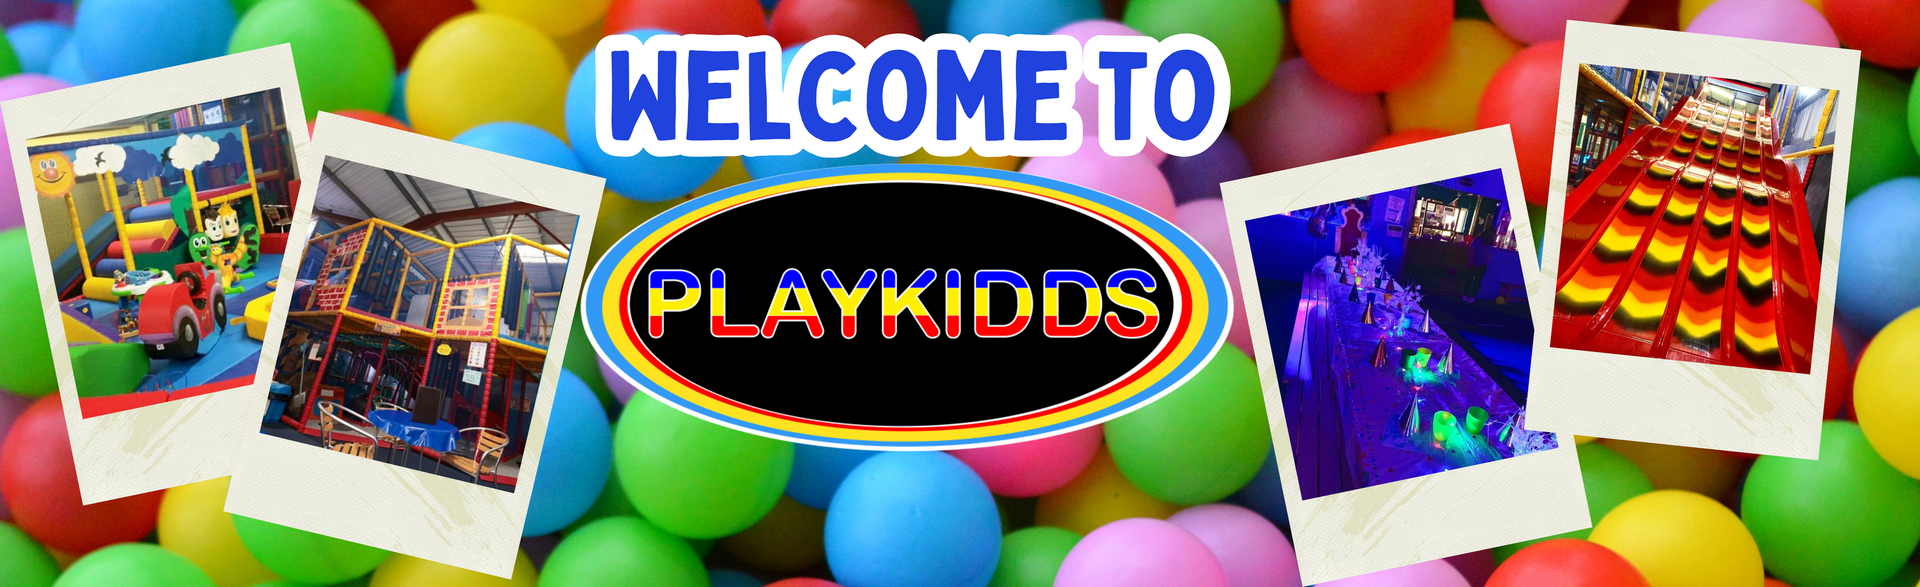 Playkidds Home Page